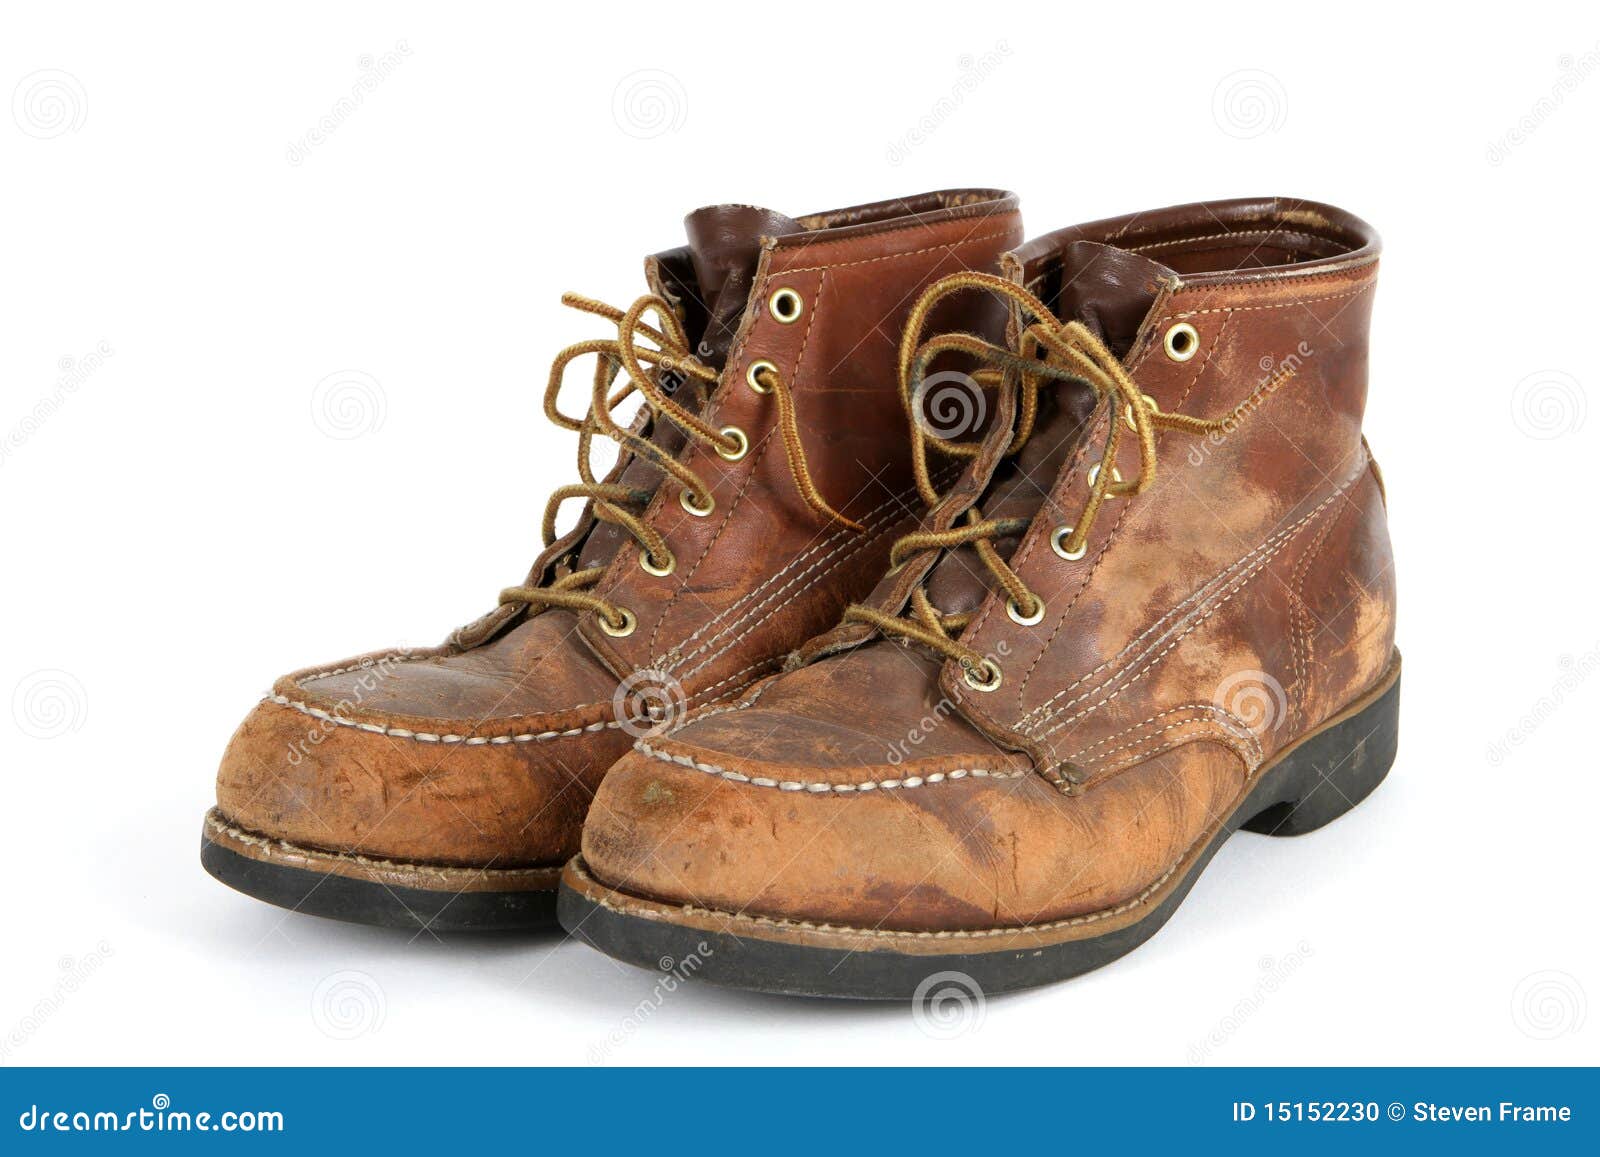 Old Steel Toed Shoes stock photo. Image of brown, worn - 15152230